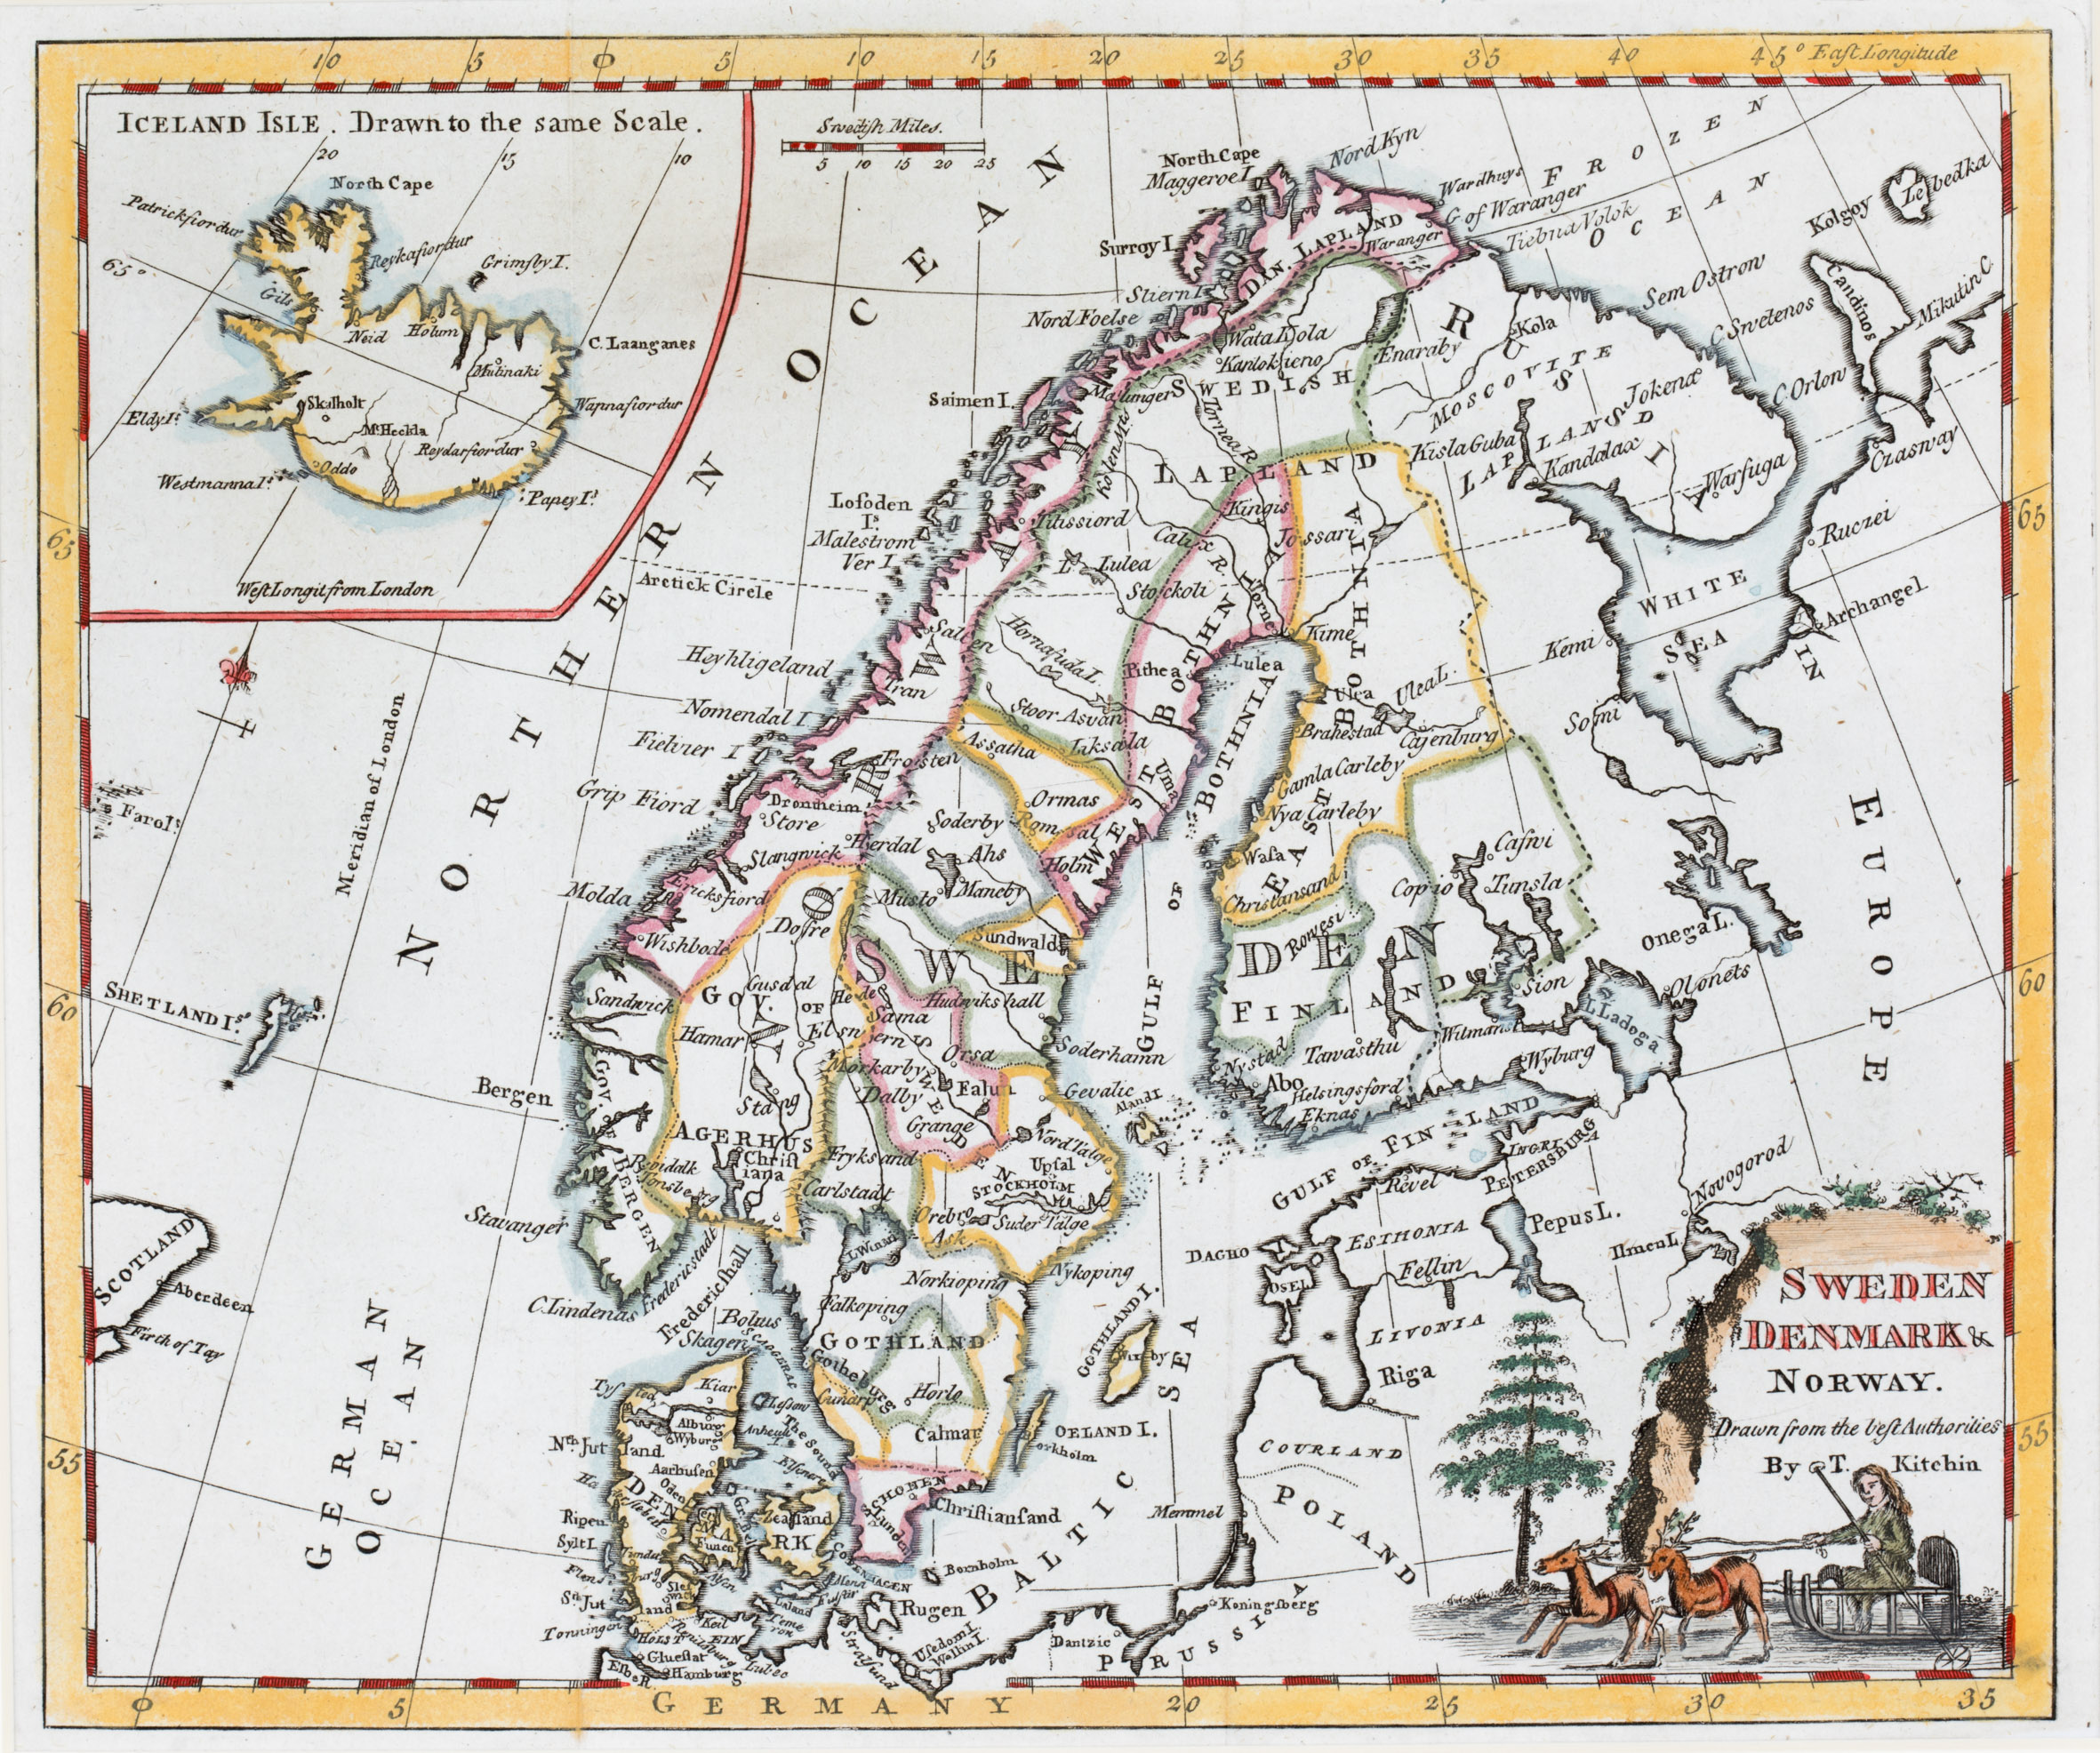 174. Sweden, Denmark & Norway. Drawn from the best Authorities By T. Kitchin